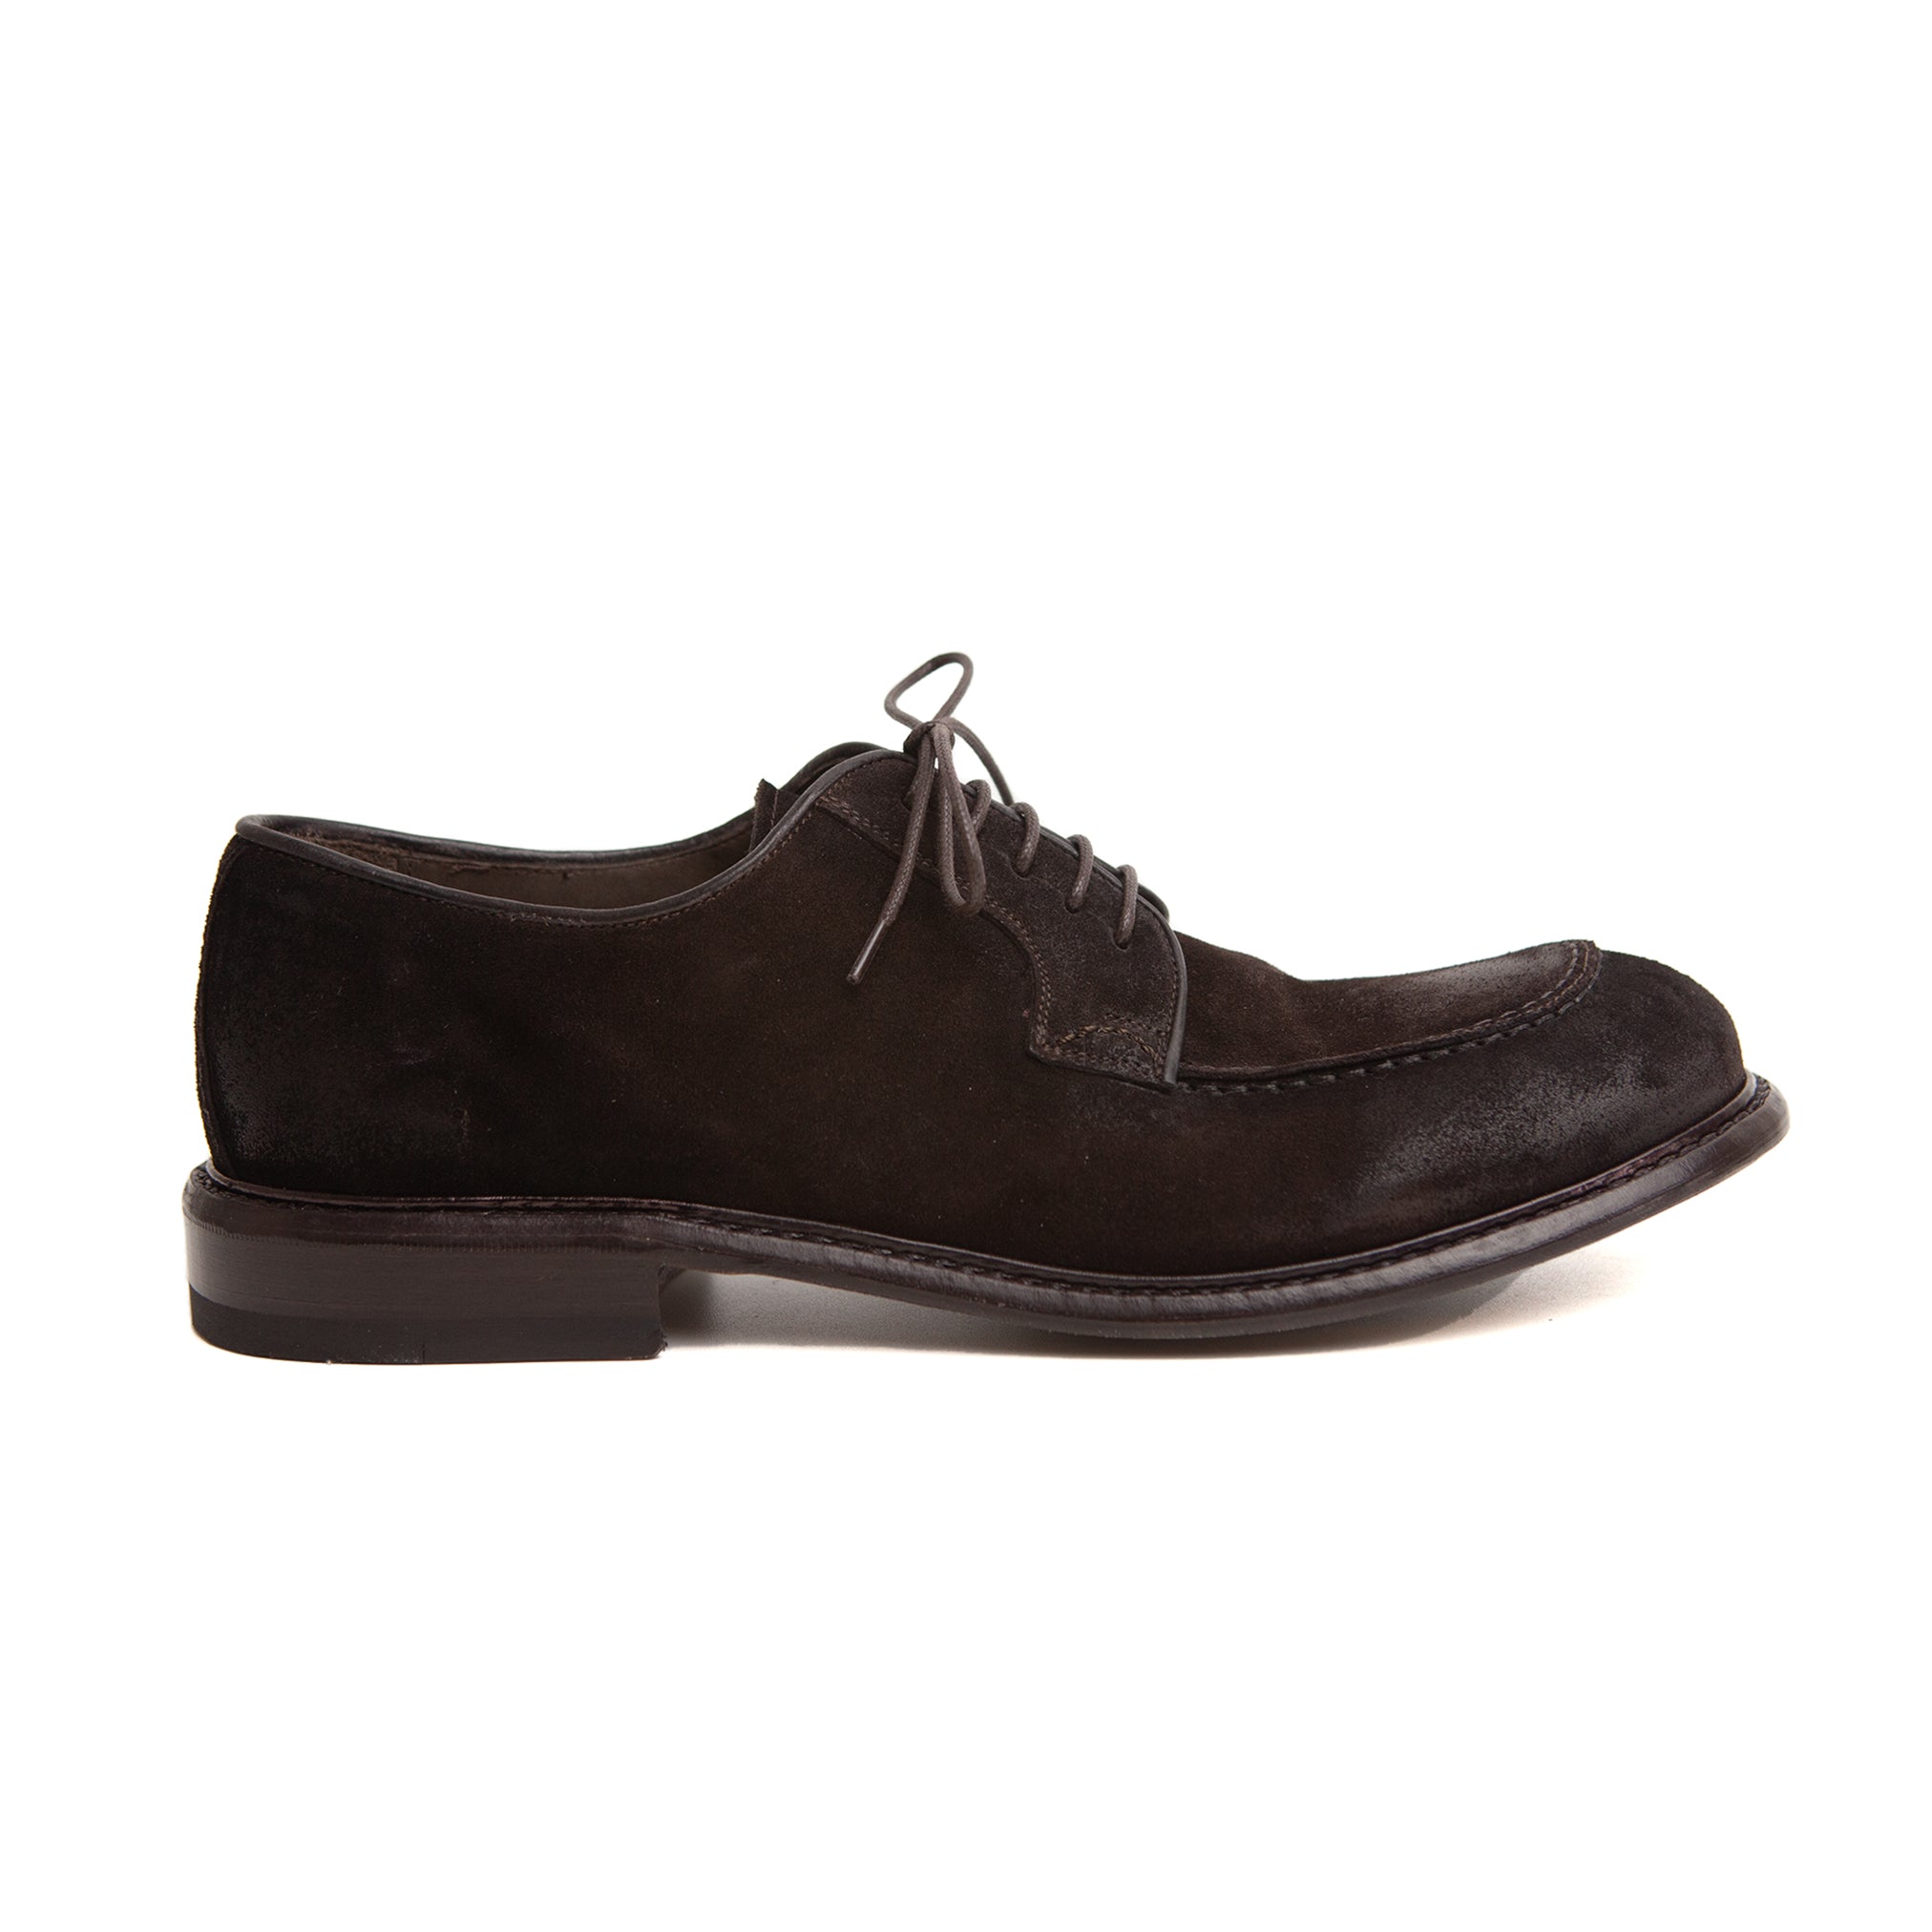 The Derby Shoe in Brown Suede